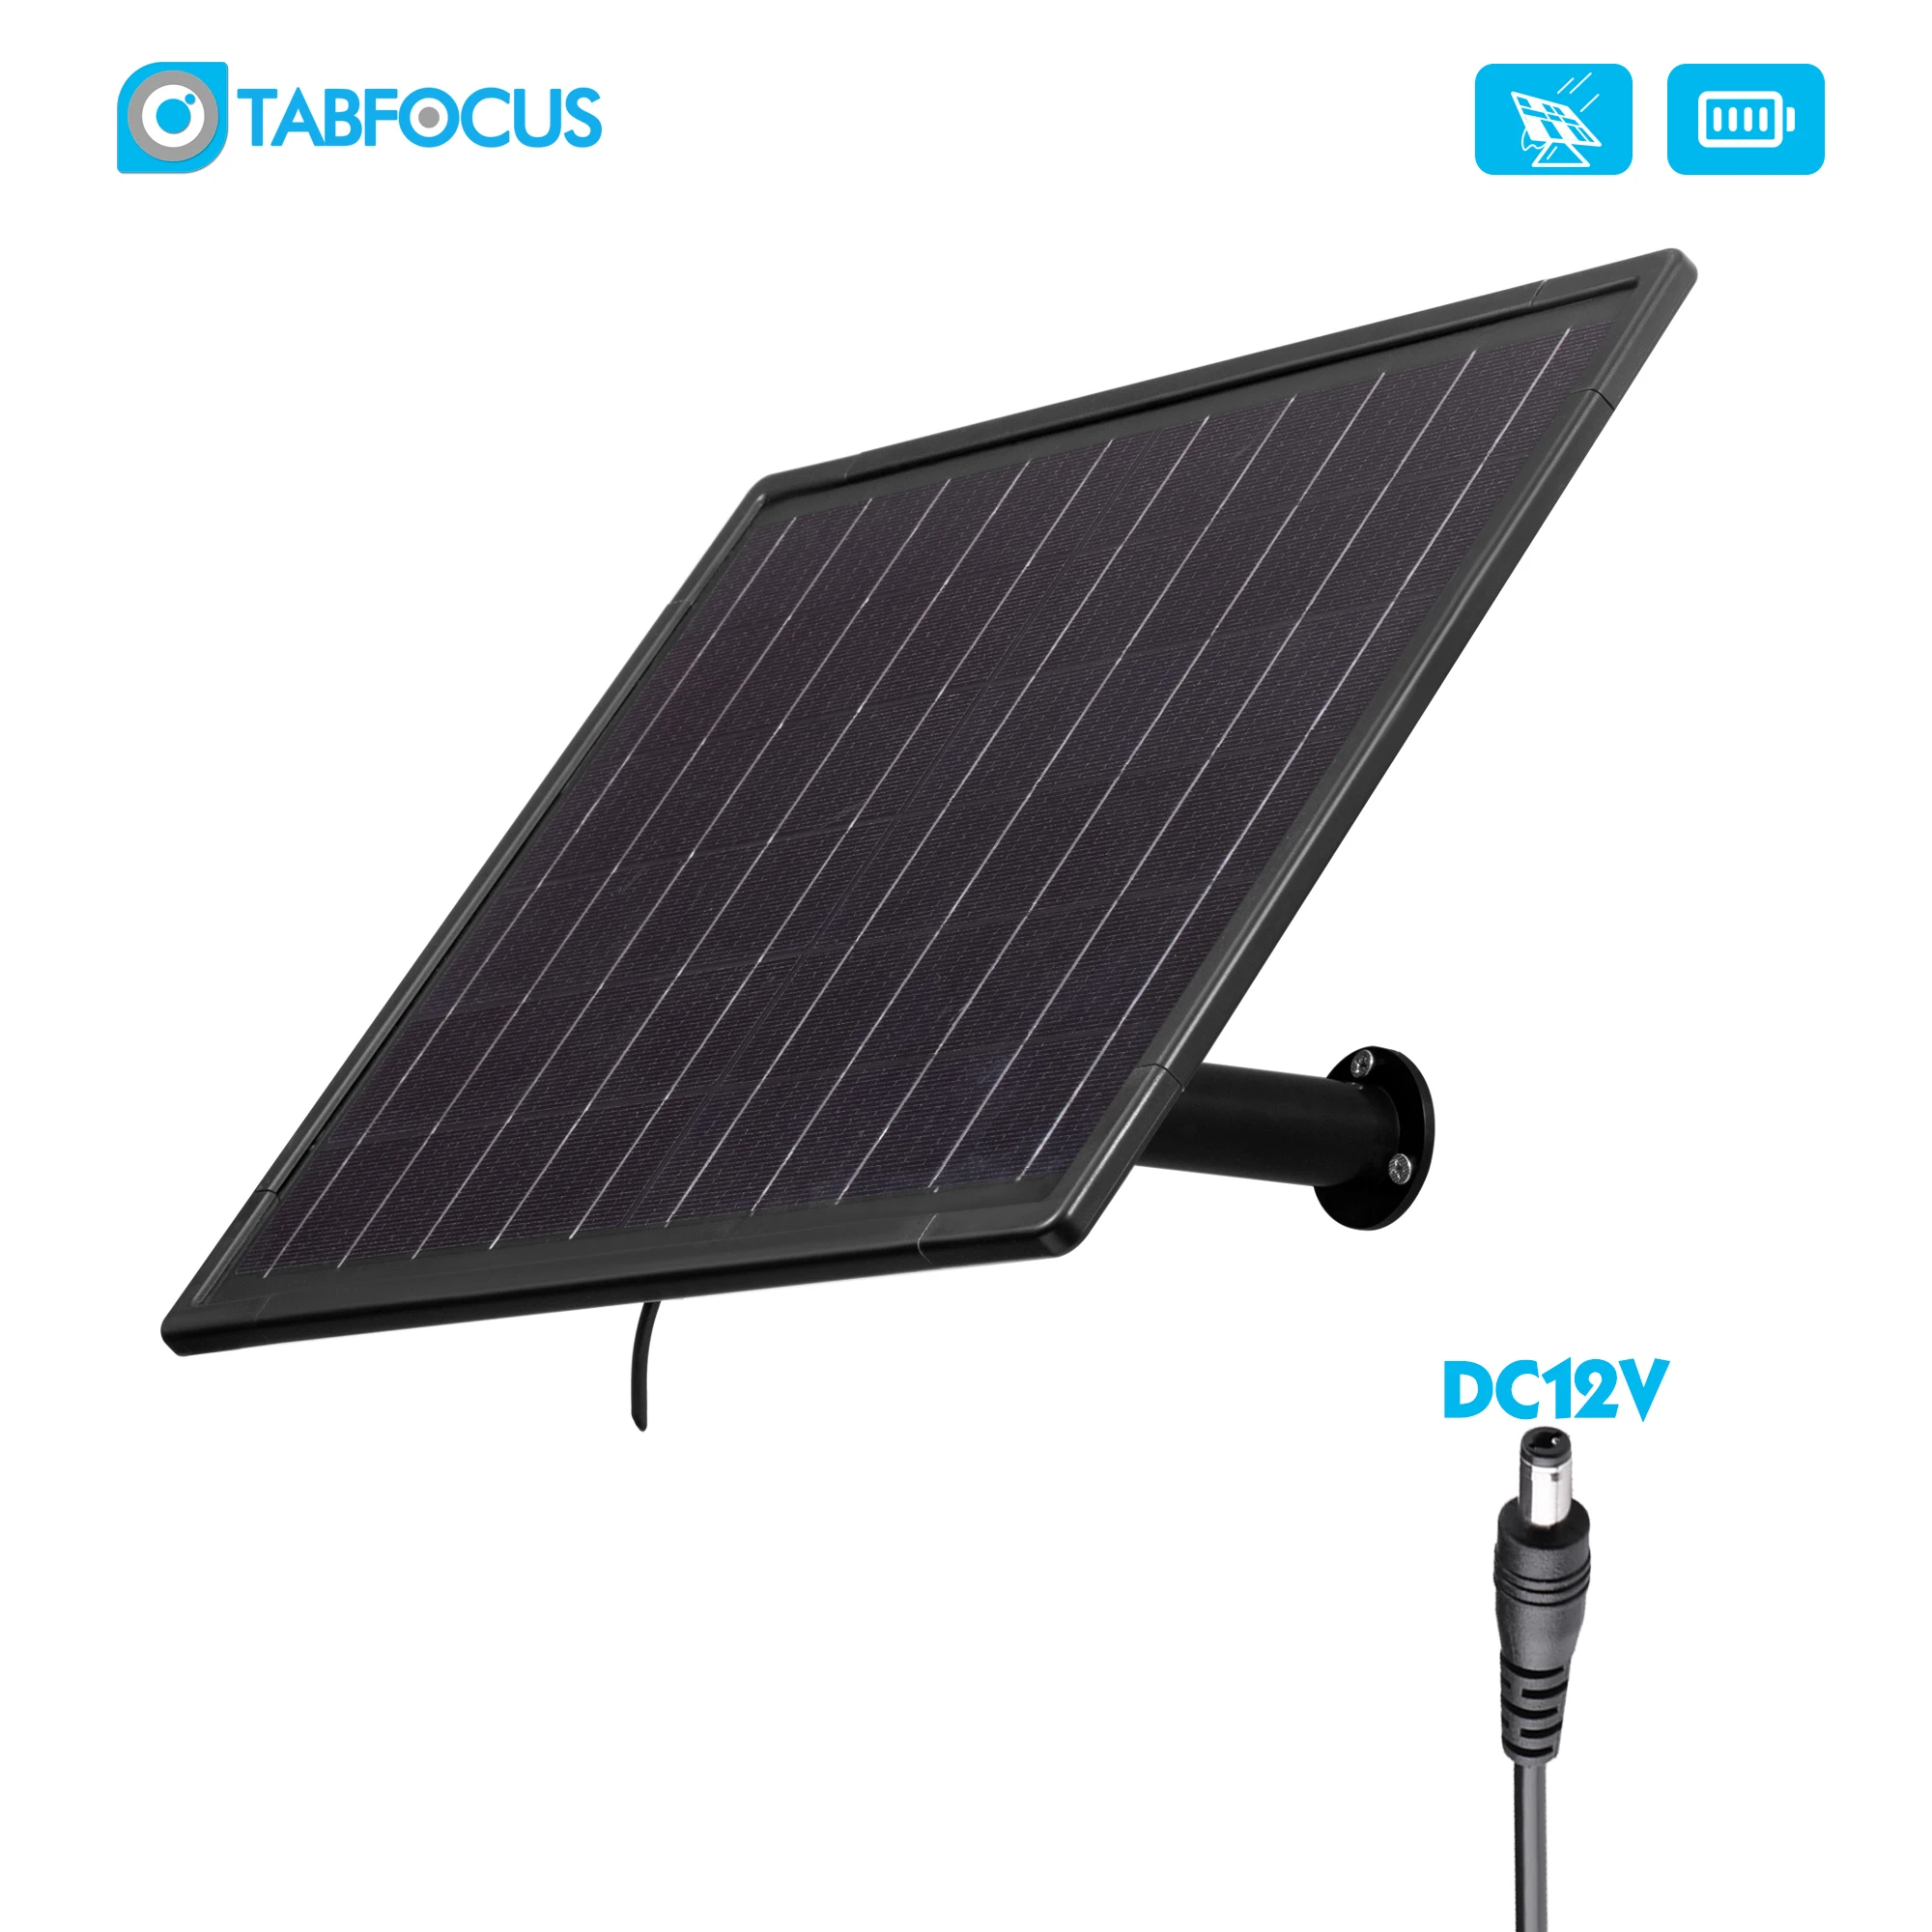 25W Waterproof Solar Panel Built-in 18650 Battery Outdoor 2m Cable Charged USB And Tpye C 5V Powered For Home Security IP Camera